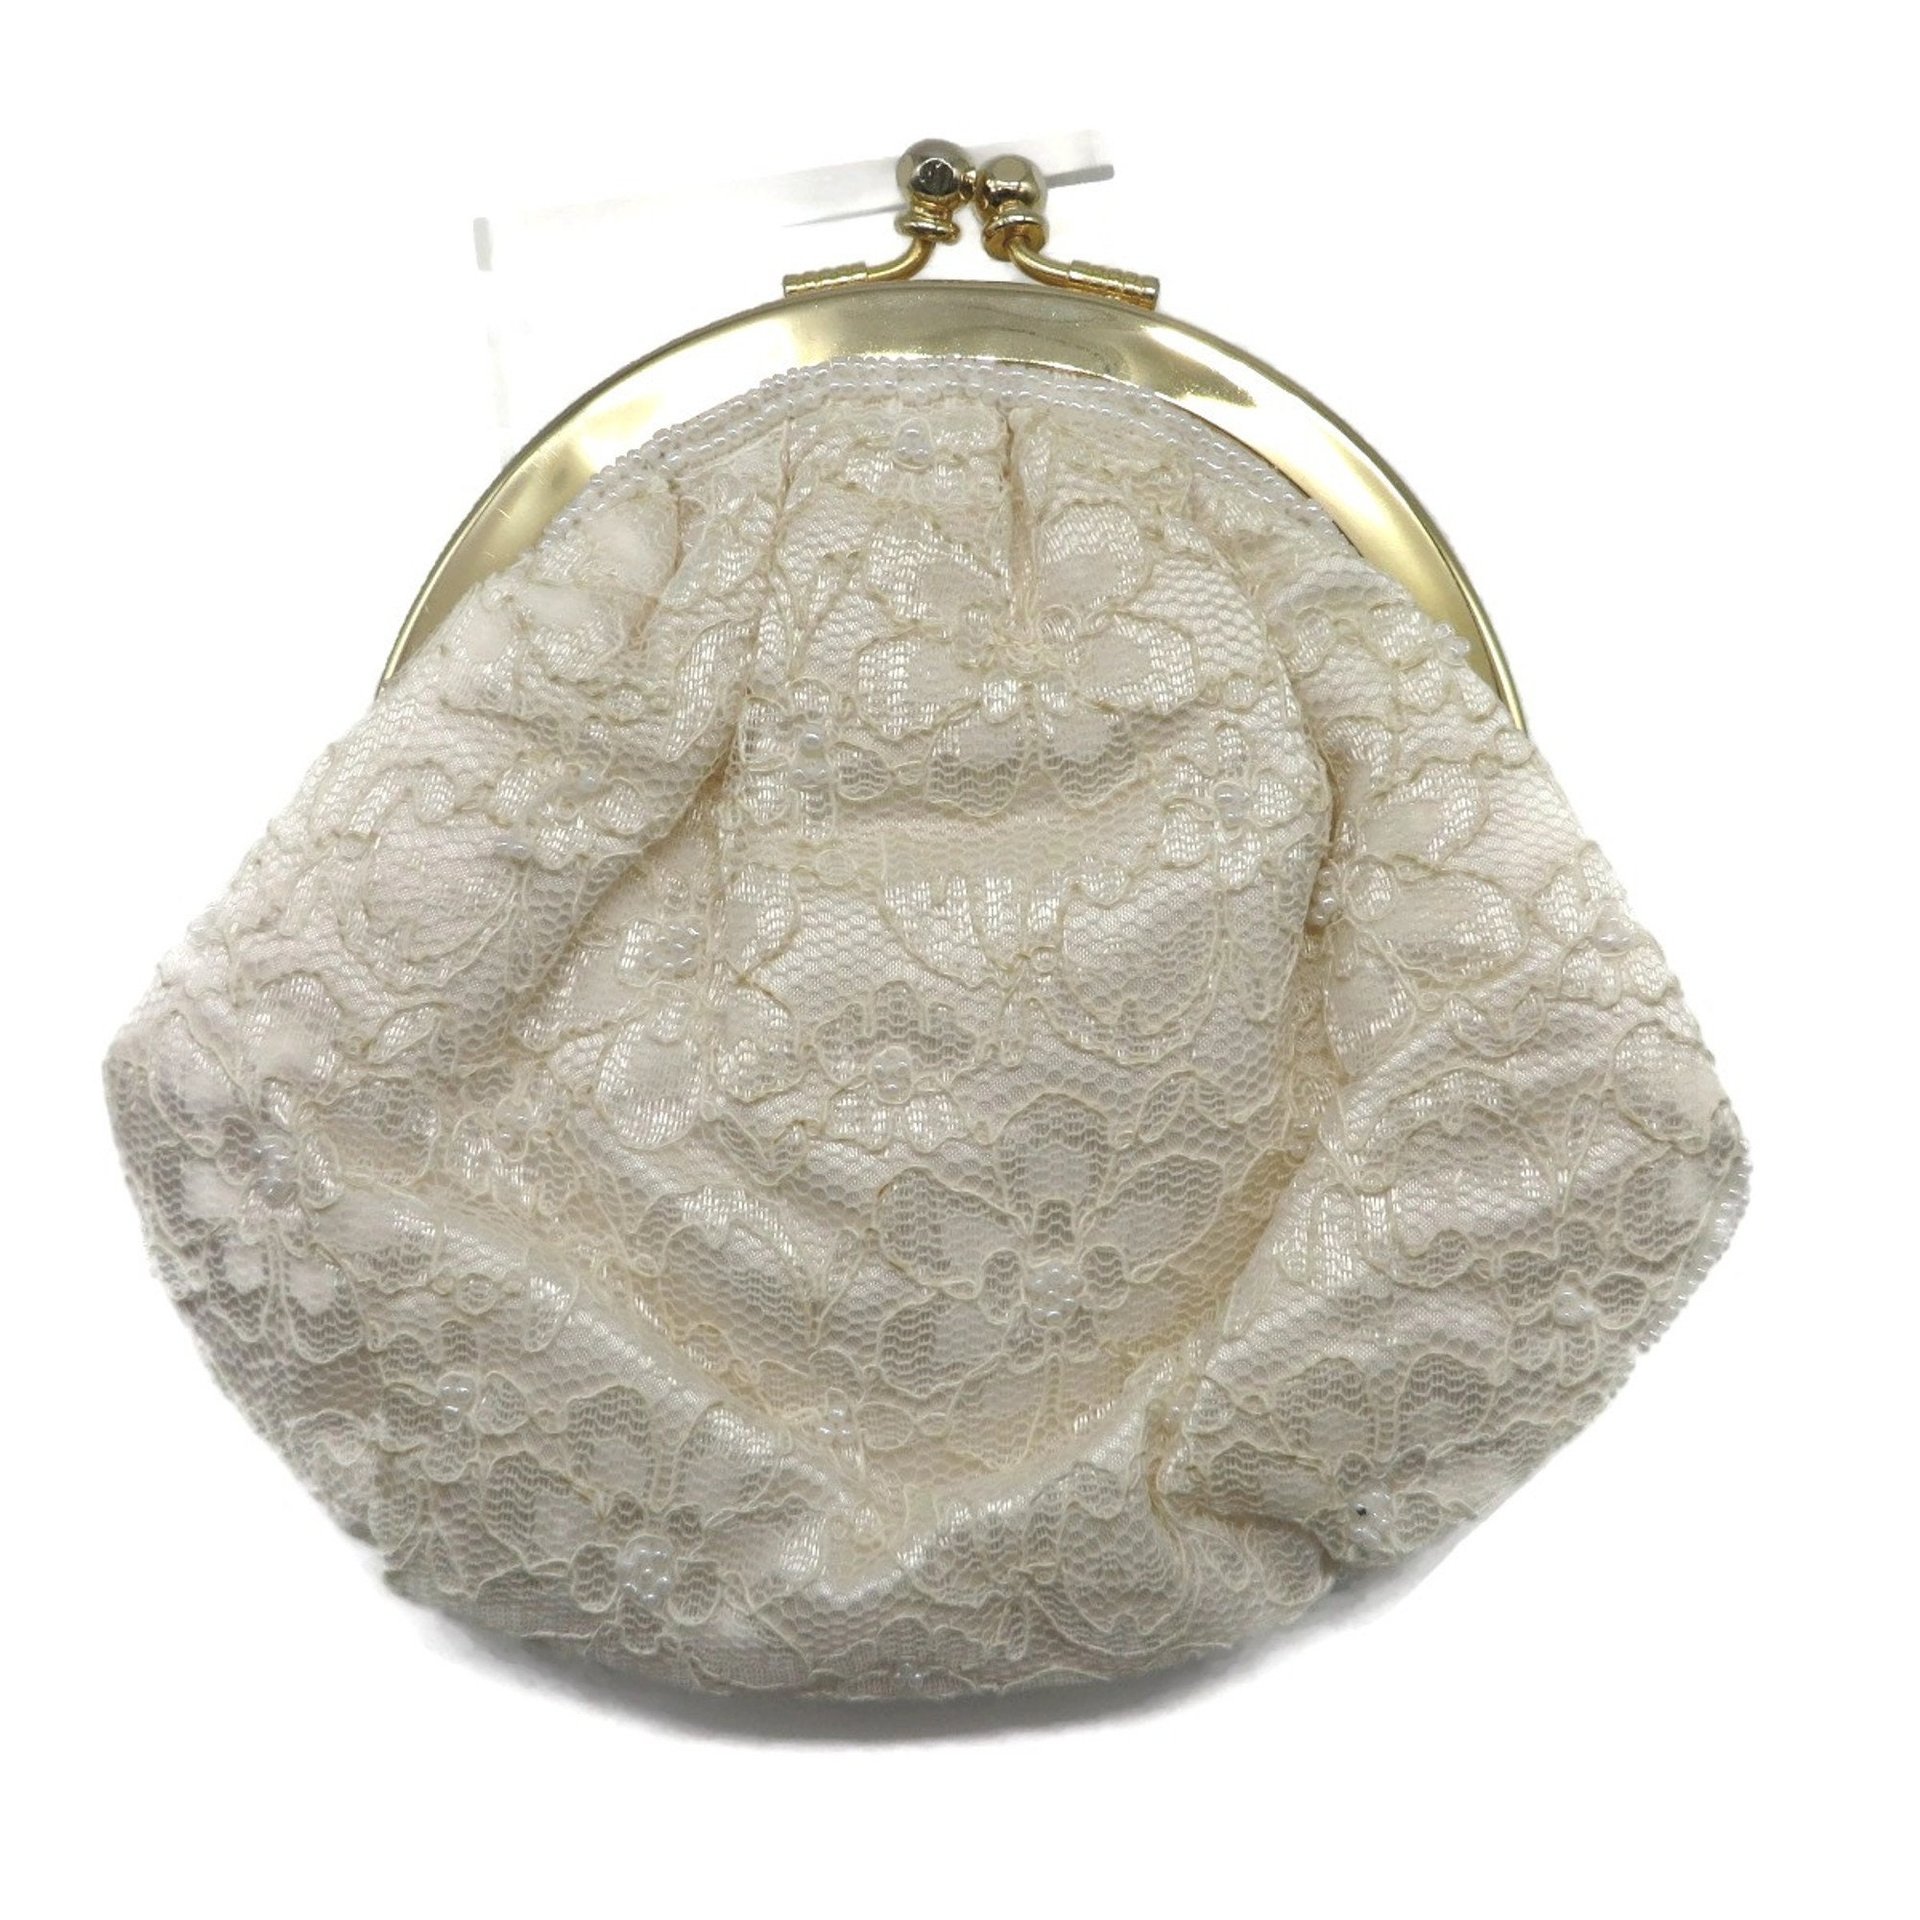 La Regale White Beaded Lace and Satin Evening Bag